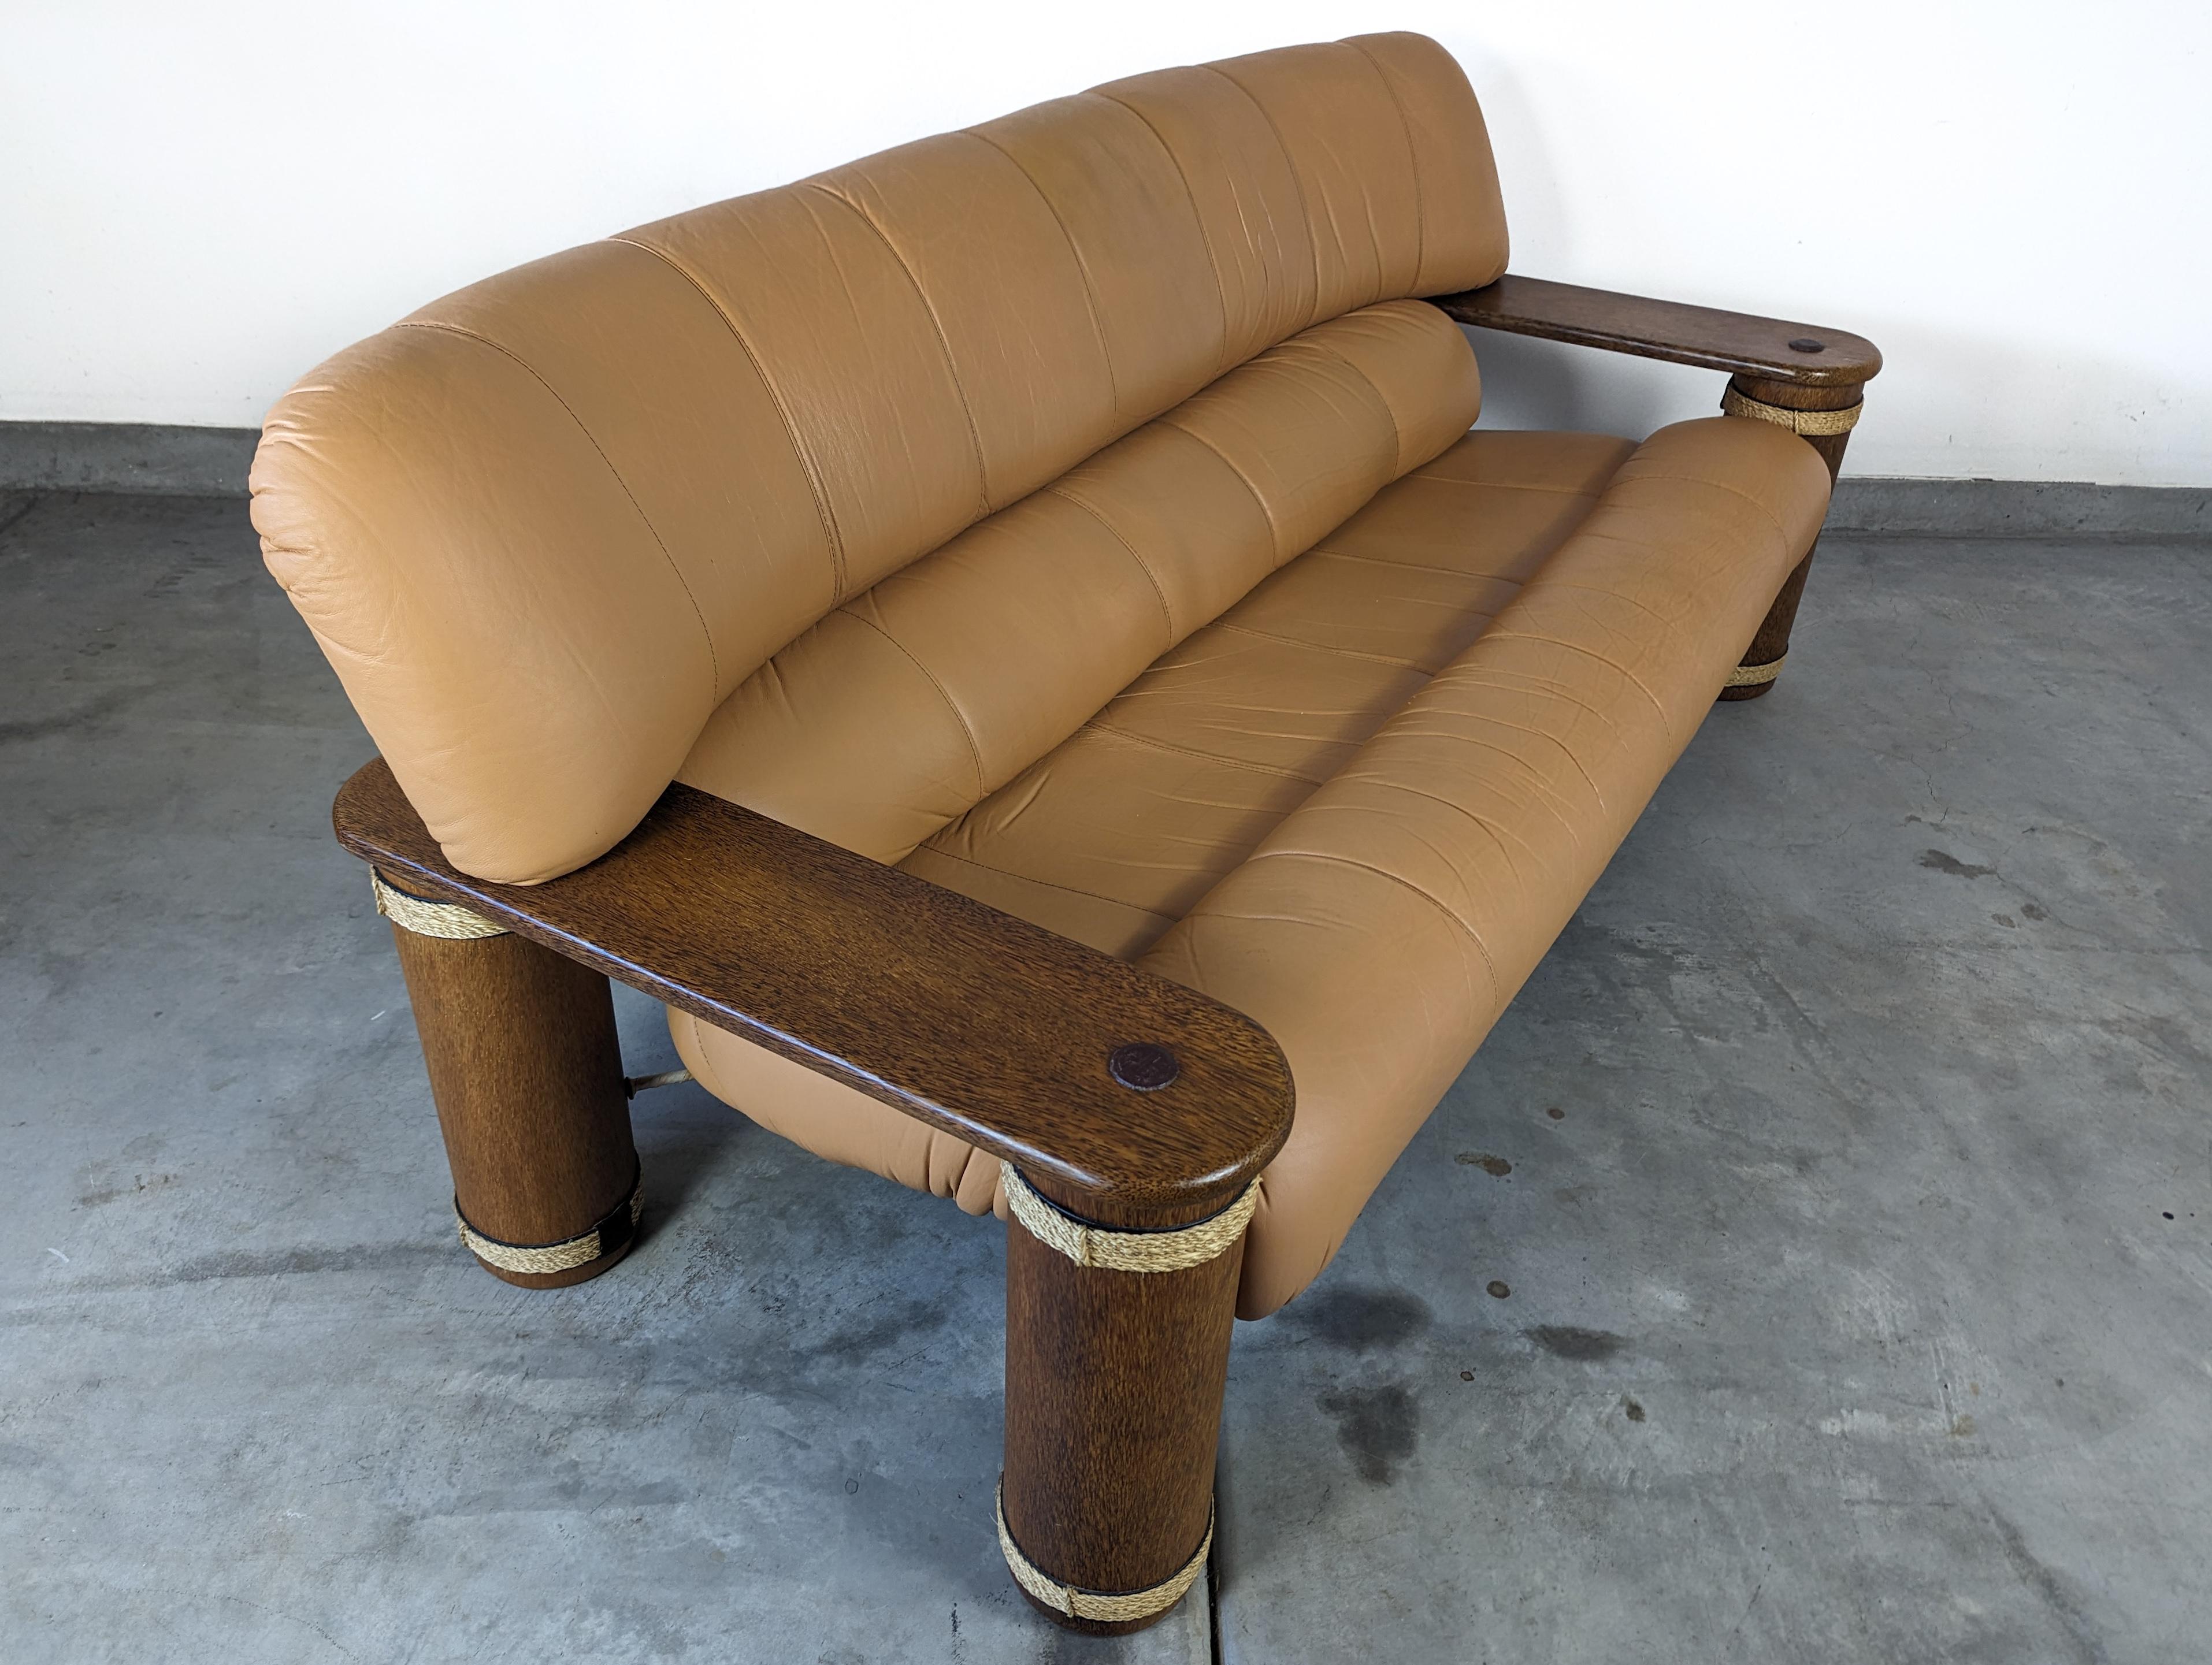 Australian Vintage Leather and Palmwood Three-Seat Sofa by Pacific Green, c1990s For Sale